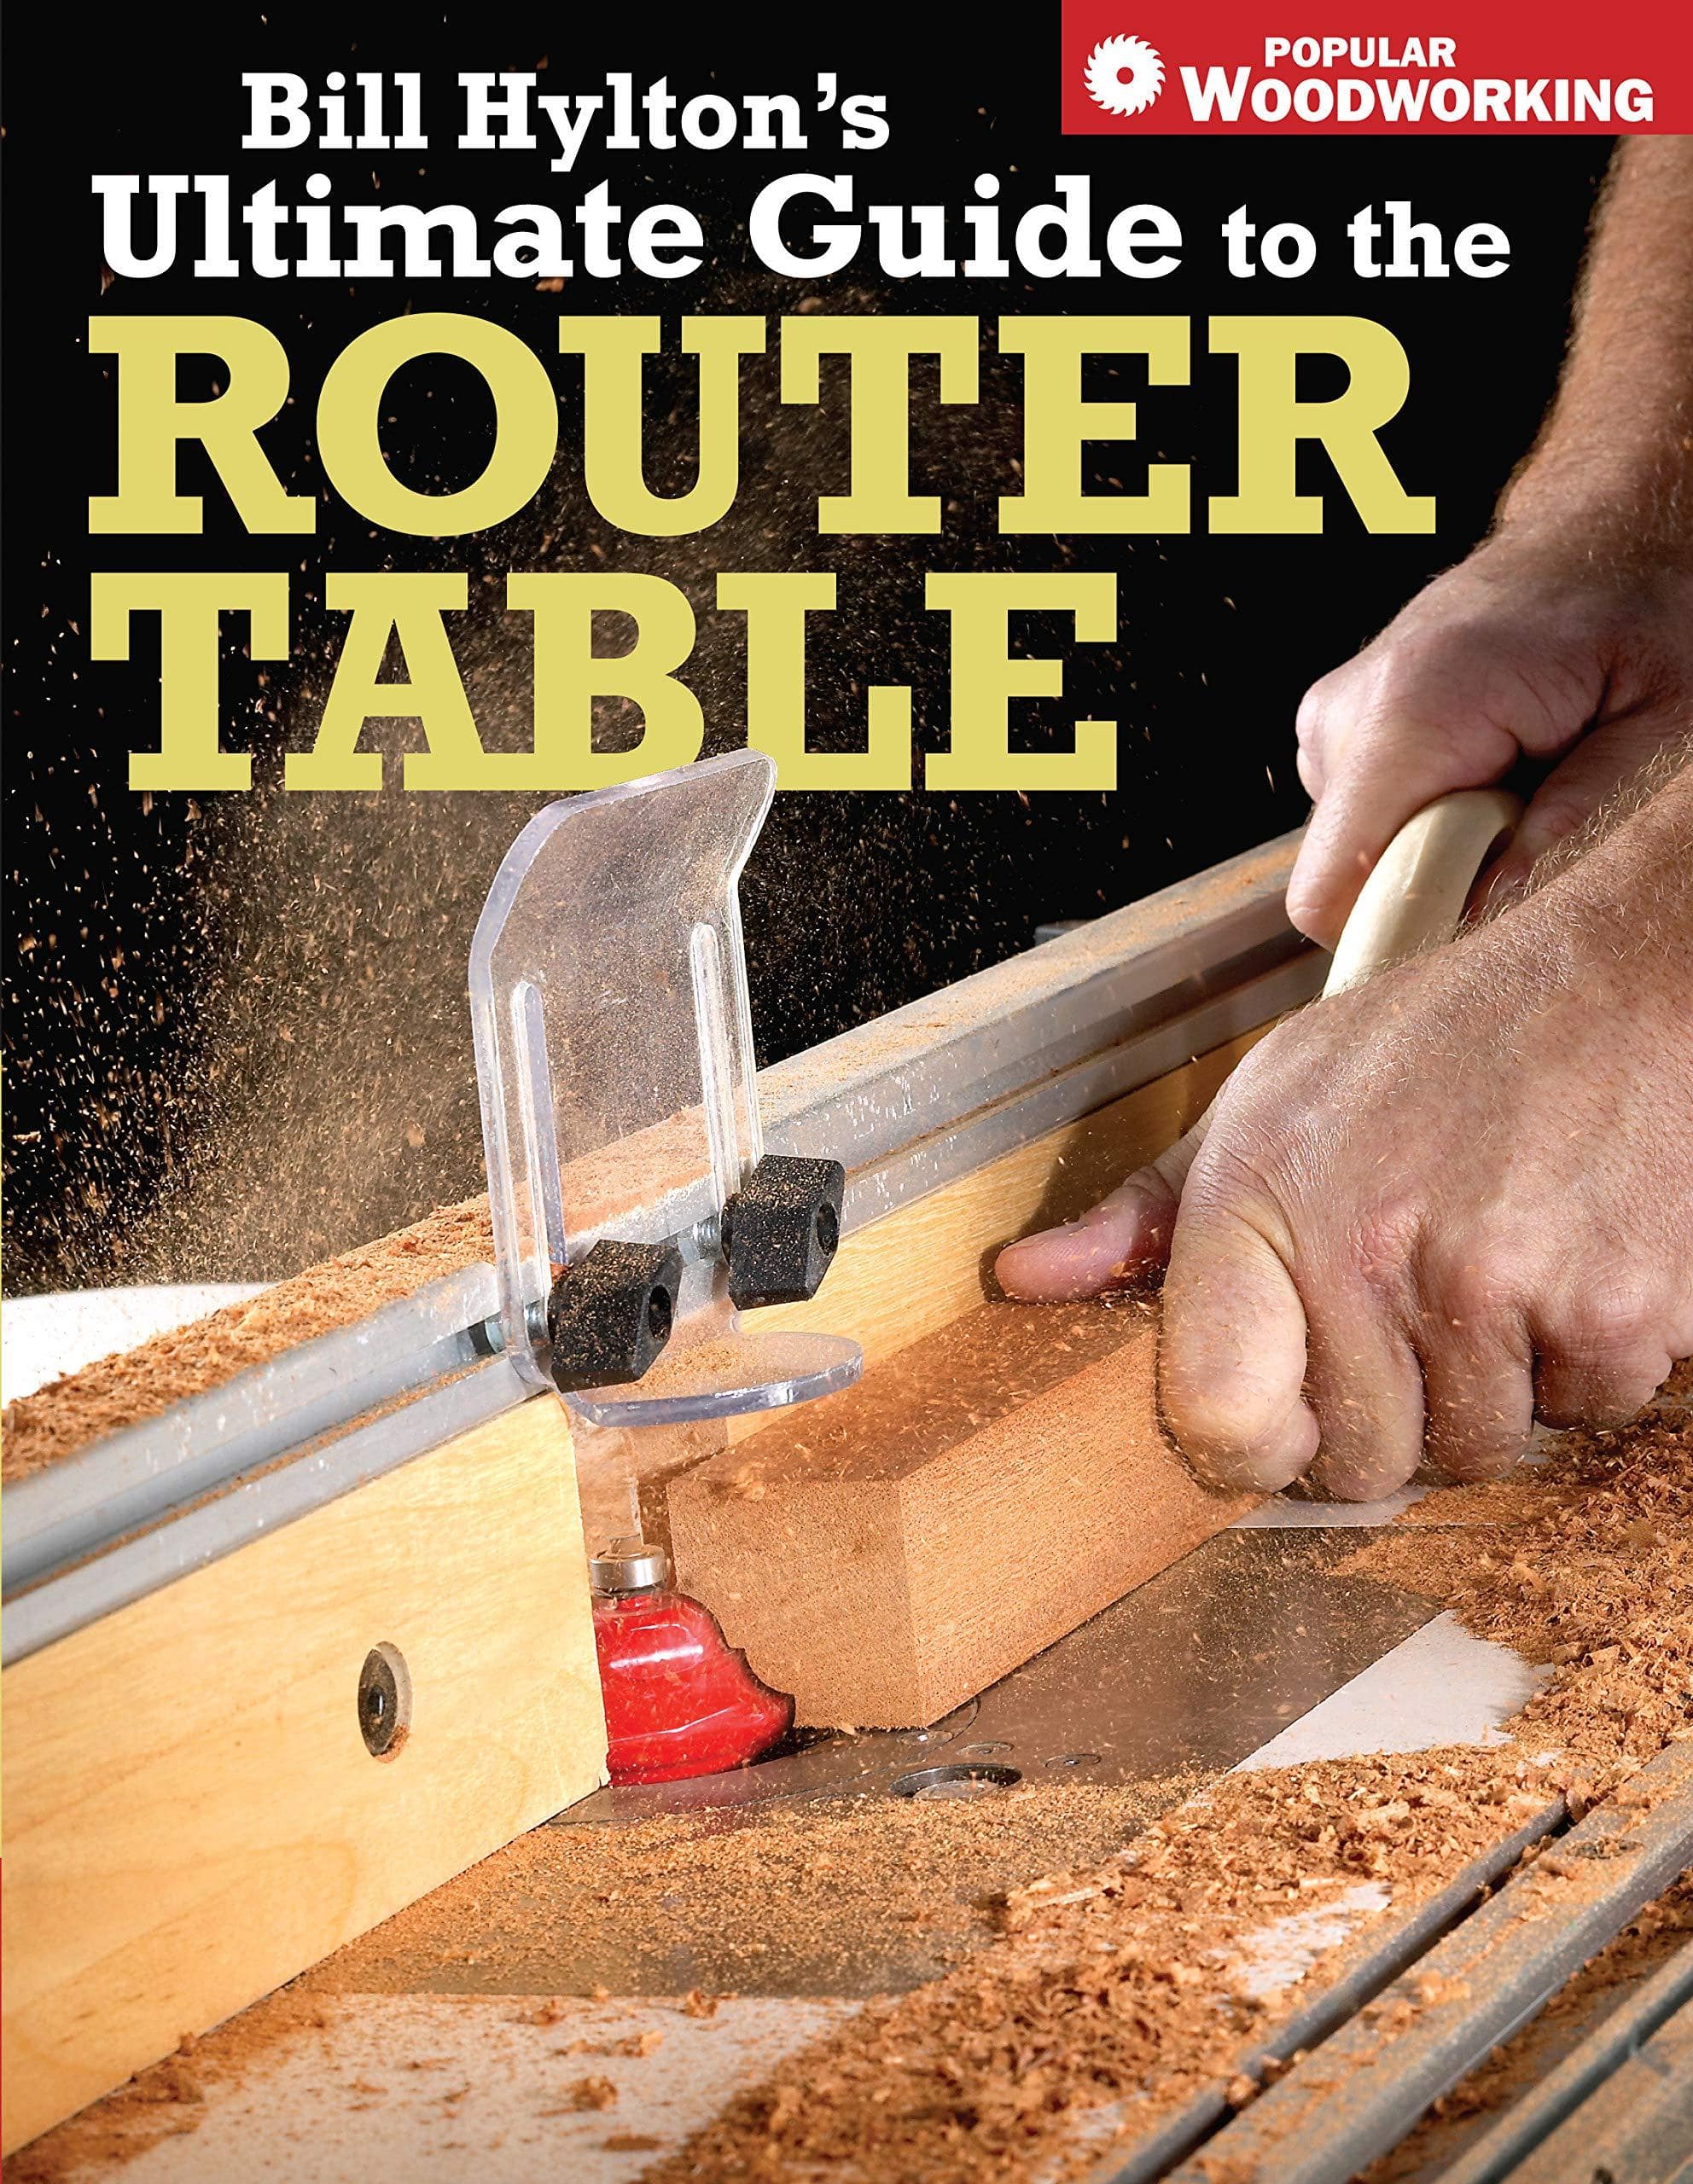 Bill Hylton's Ultimate Guide to the Router Table - SureShot Books Publishing LLC